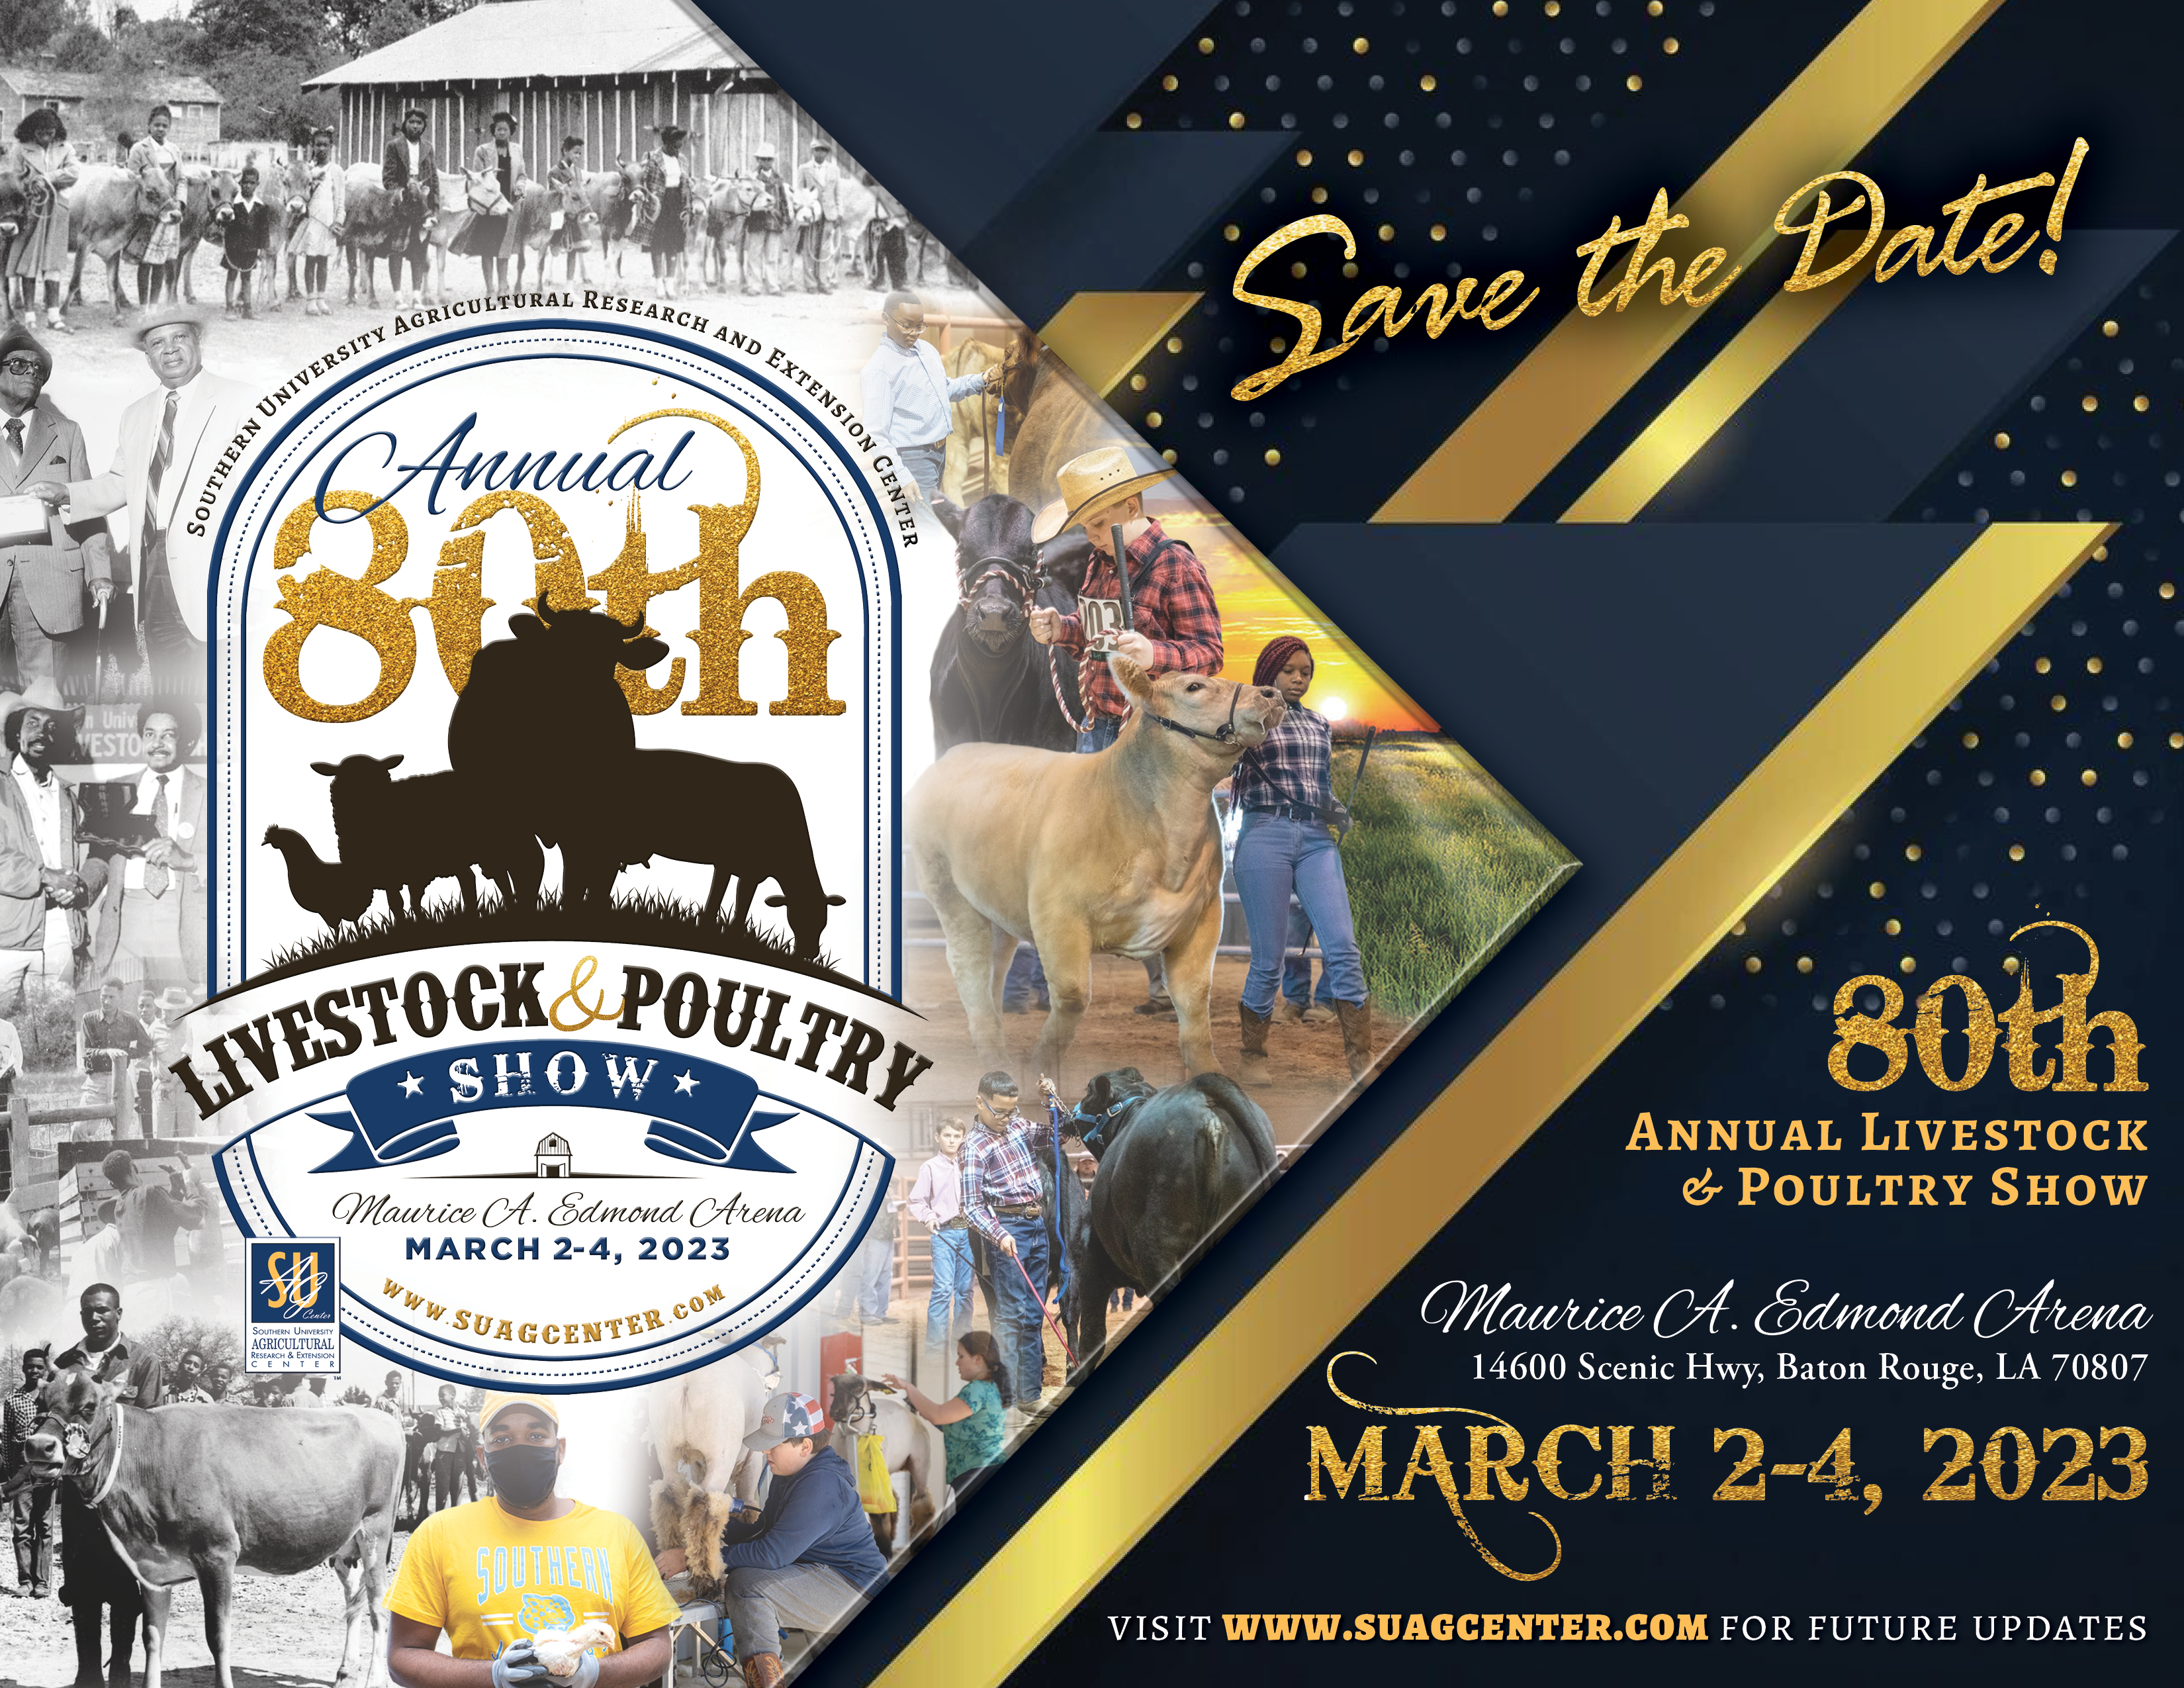 Livestock Show 2023 Save the Date